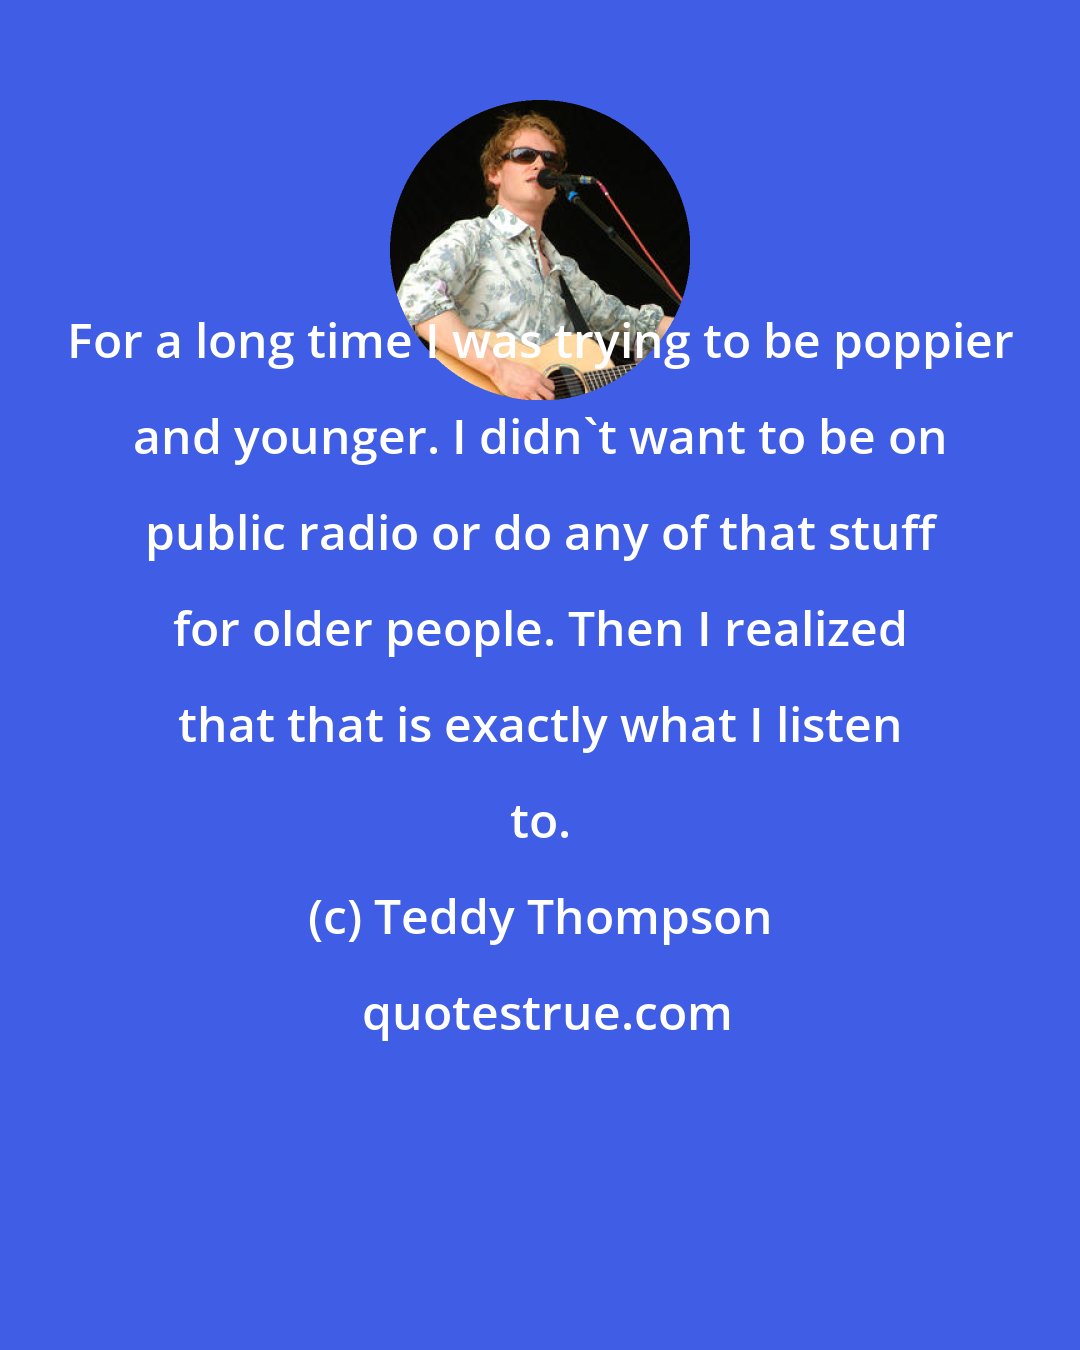 Teddy Thompson: For a long time I was trying to be poppier and younger. I didn't want to be on public radio or do any of that stuff for older people. Then I realized that that is exactly what I listen to.